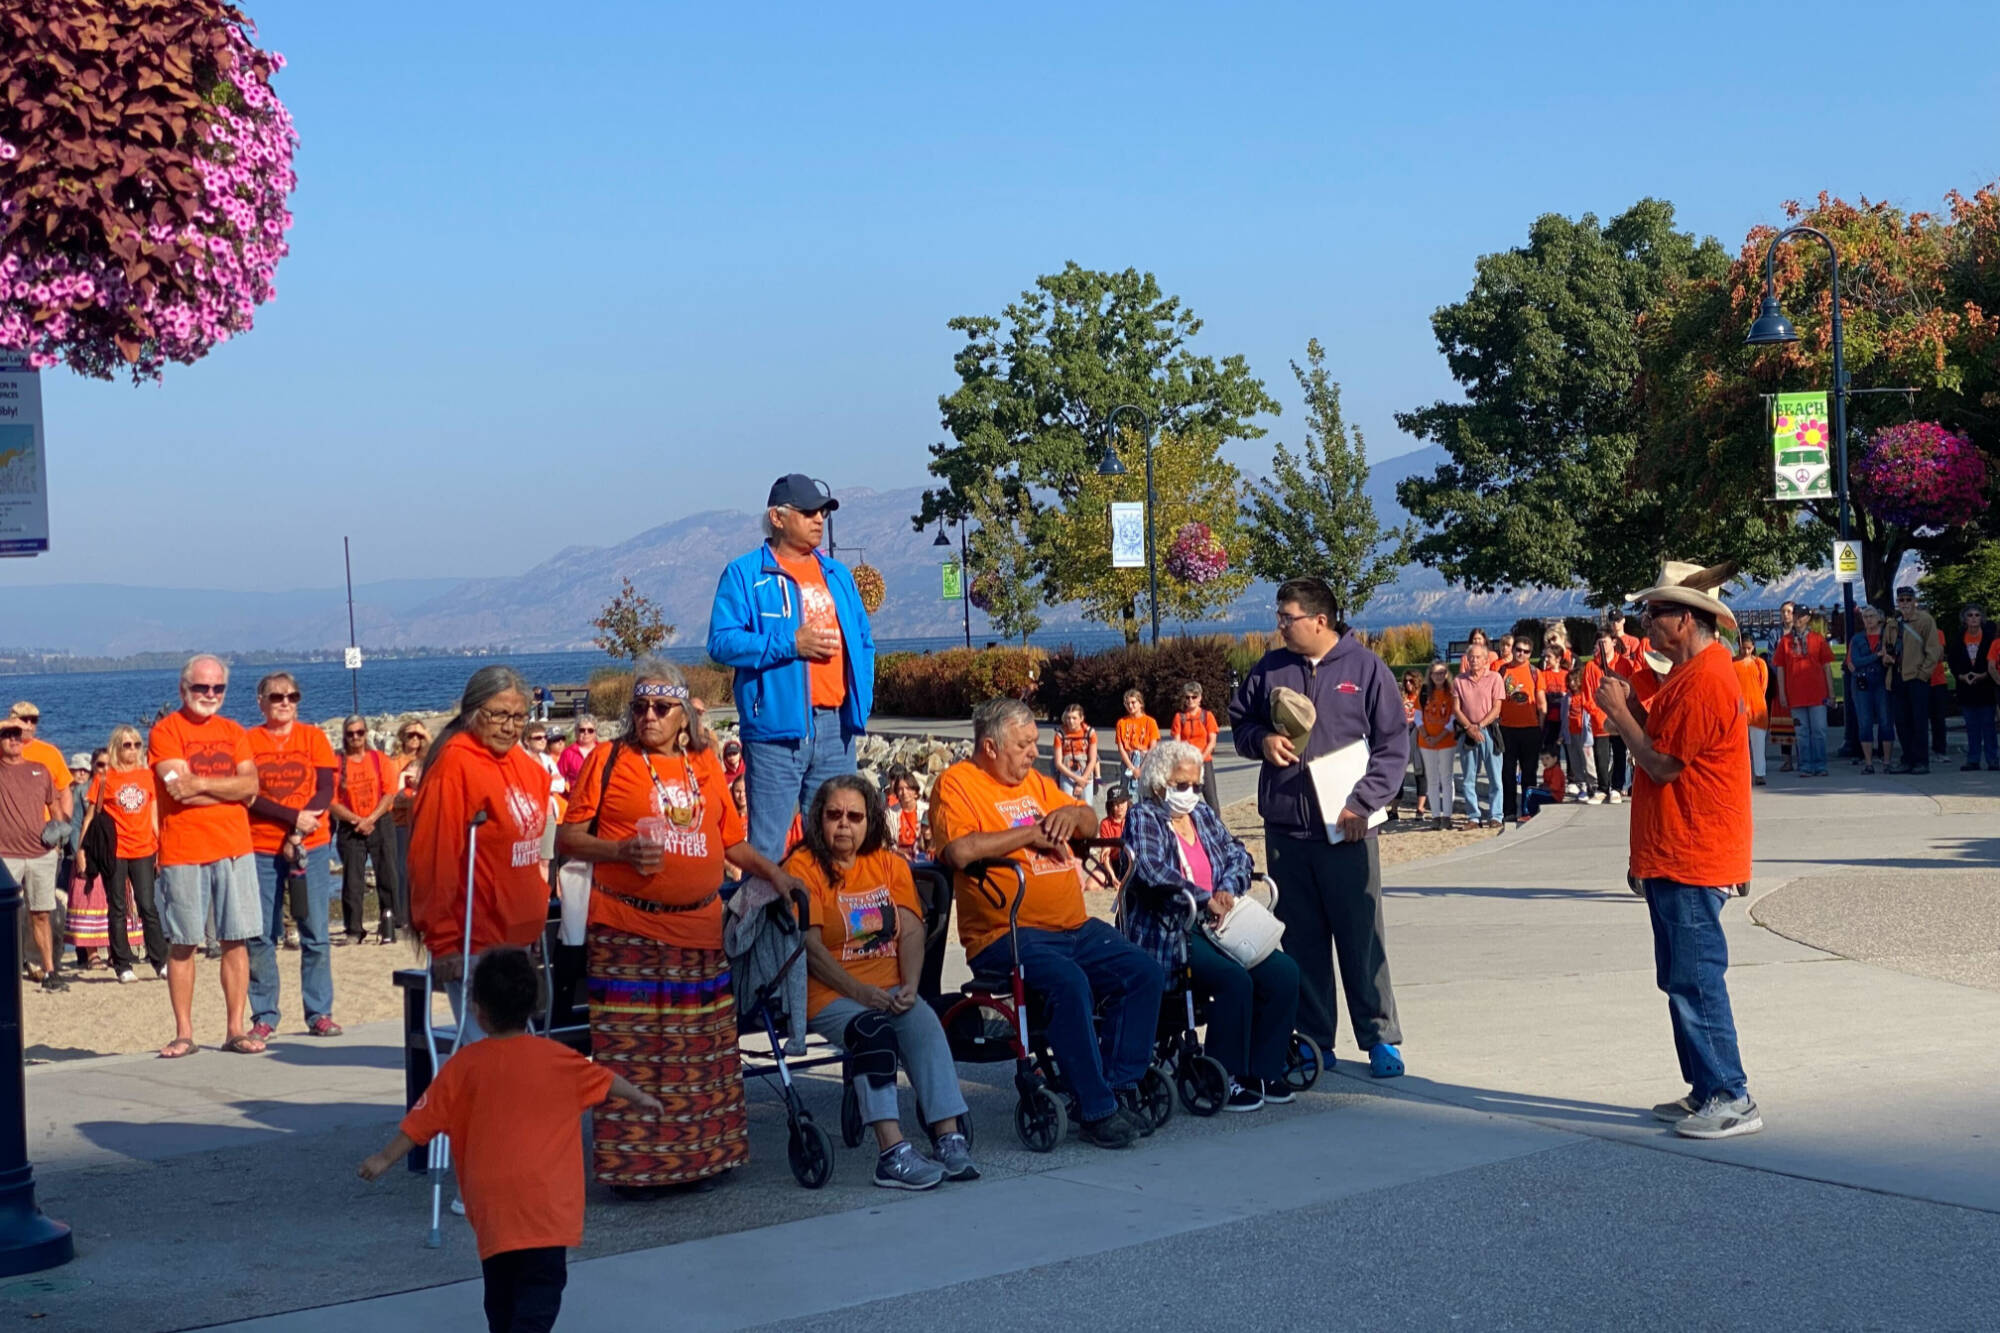 Chief Greg Gabriel of the Penticton Indian Band and local survivors of the residential school system spoke as part of the second Walk for the Children in Penticton. (Logan Lockhart - Western News)